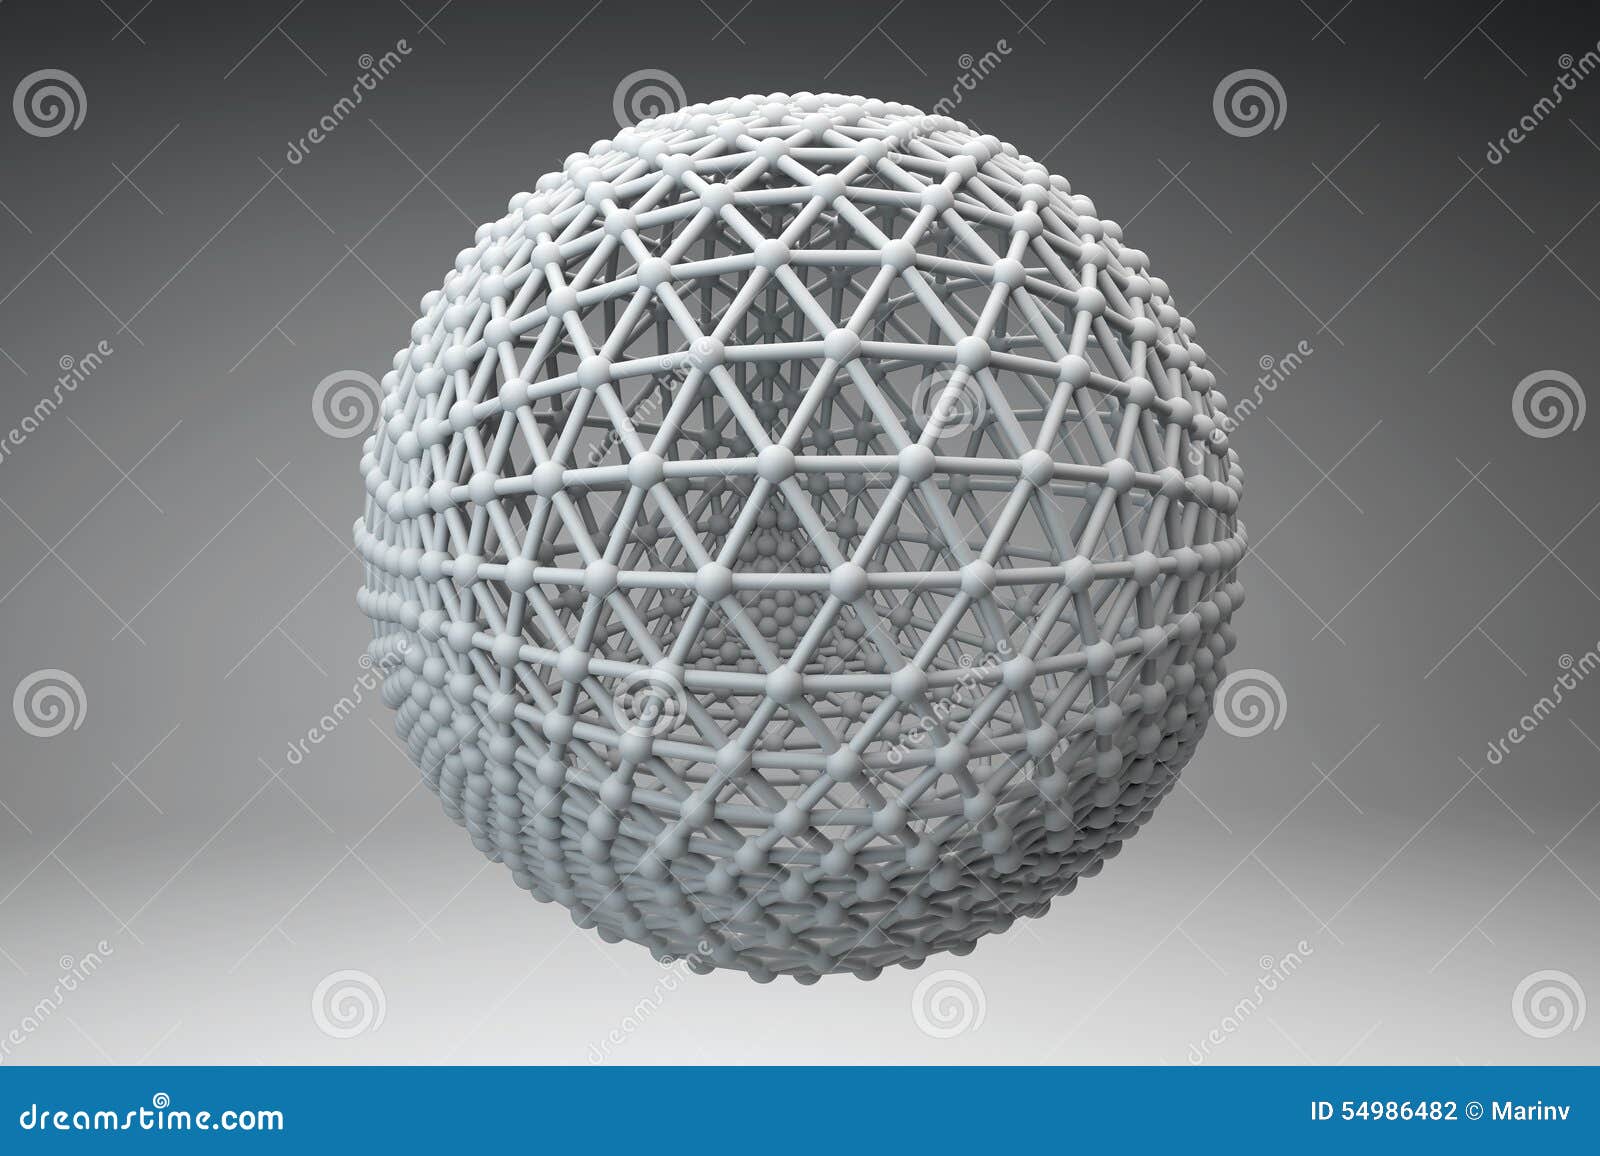 sphere made of smaller spheres connected by strands